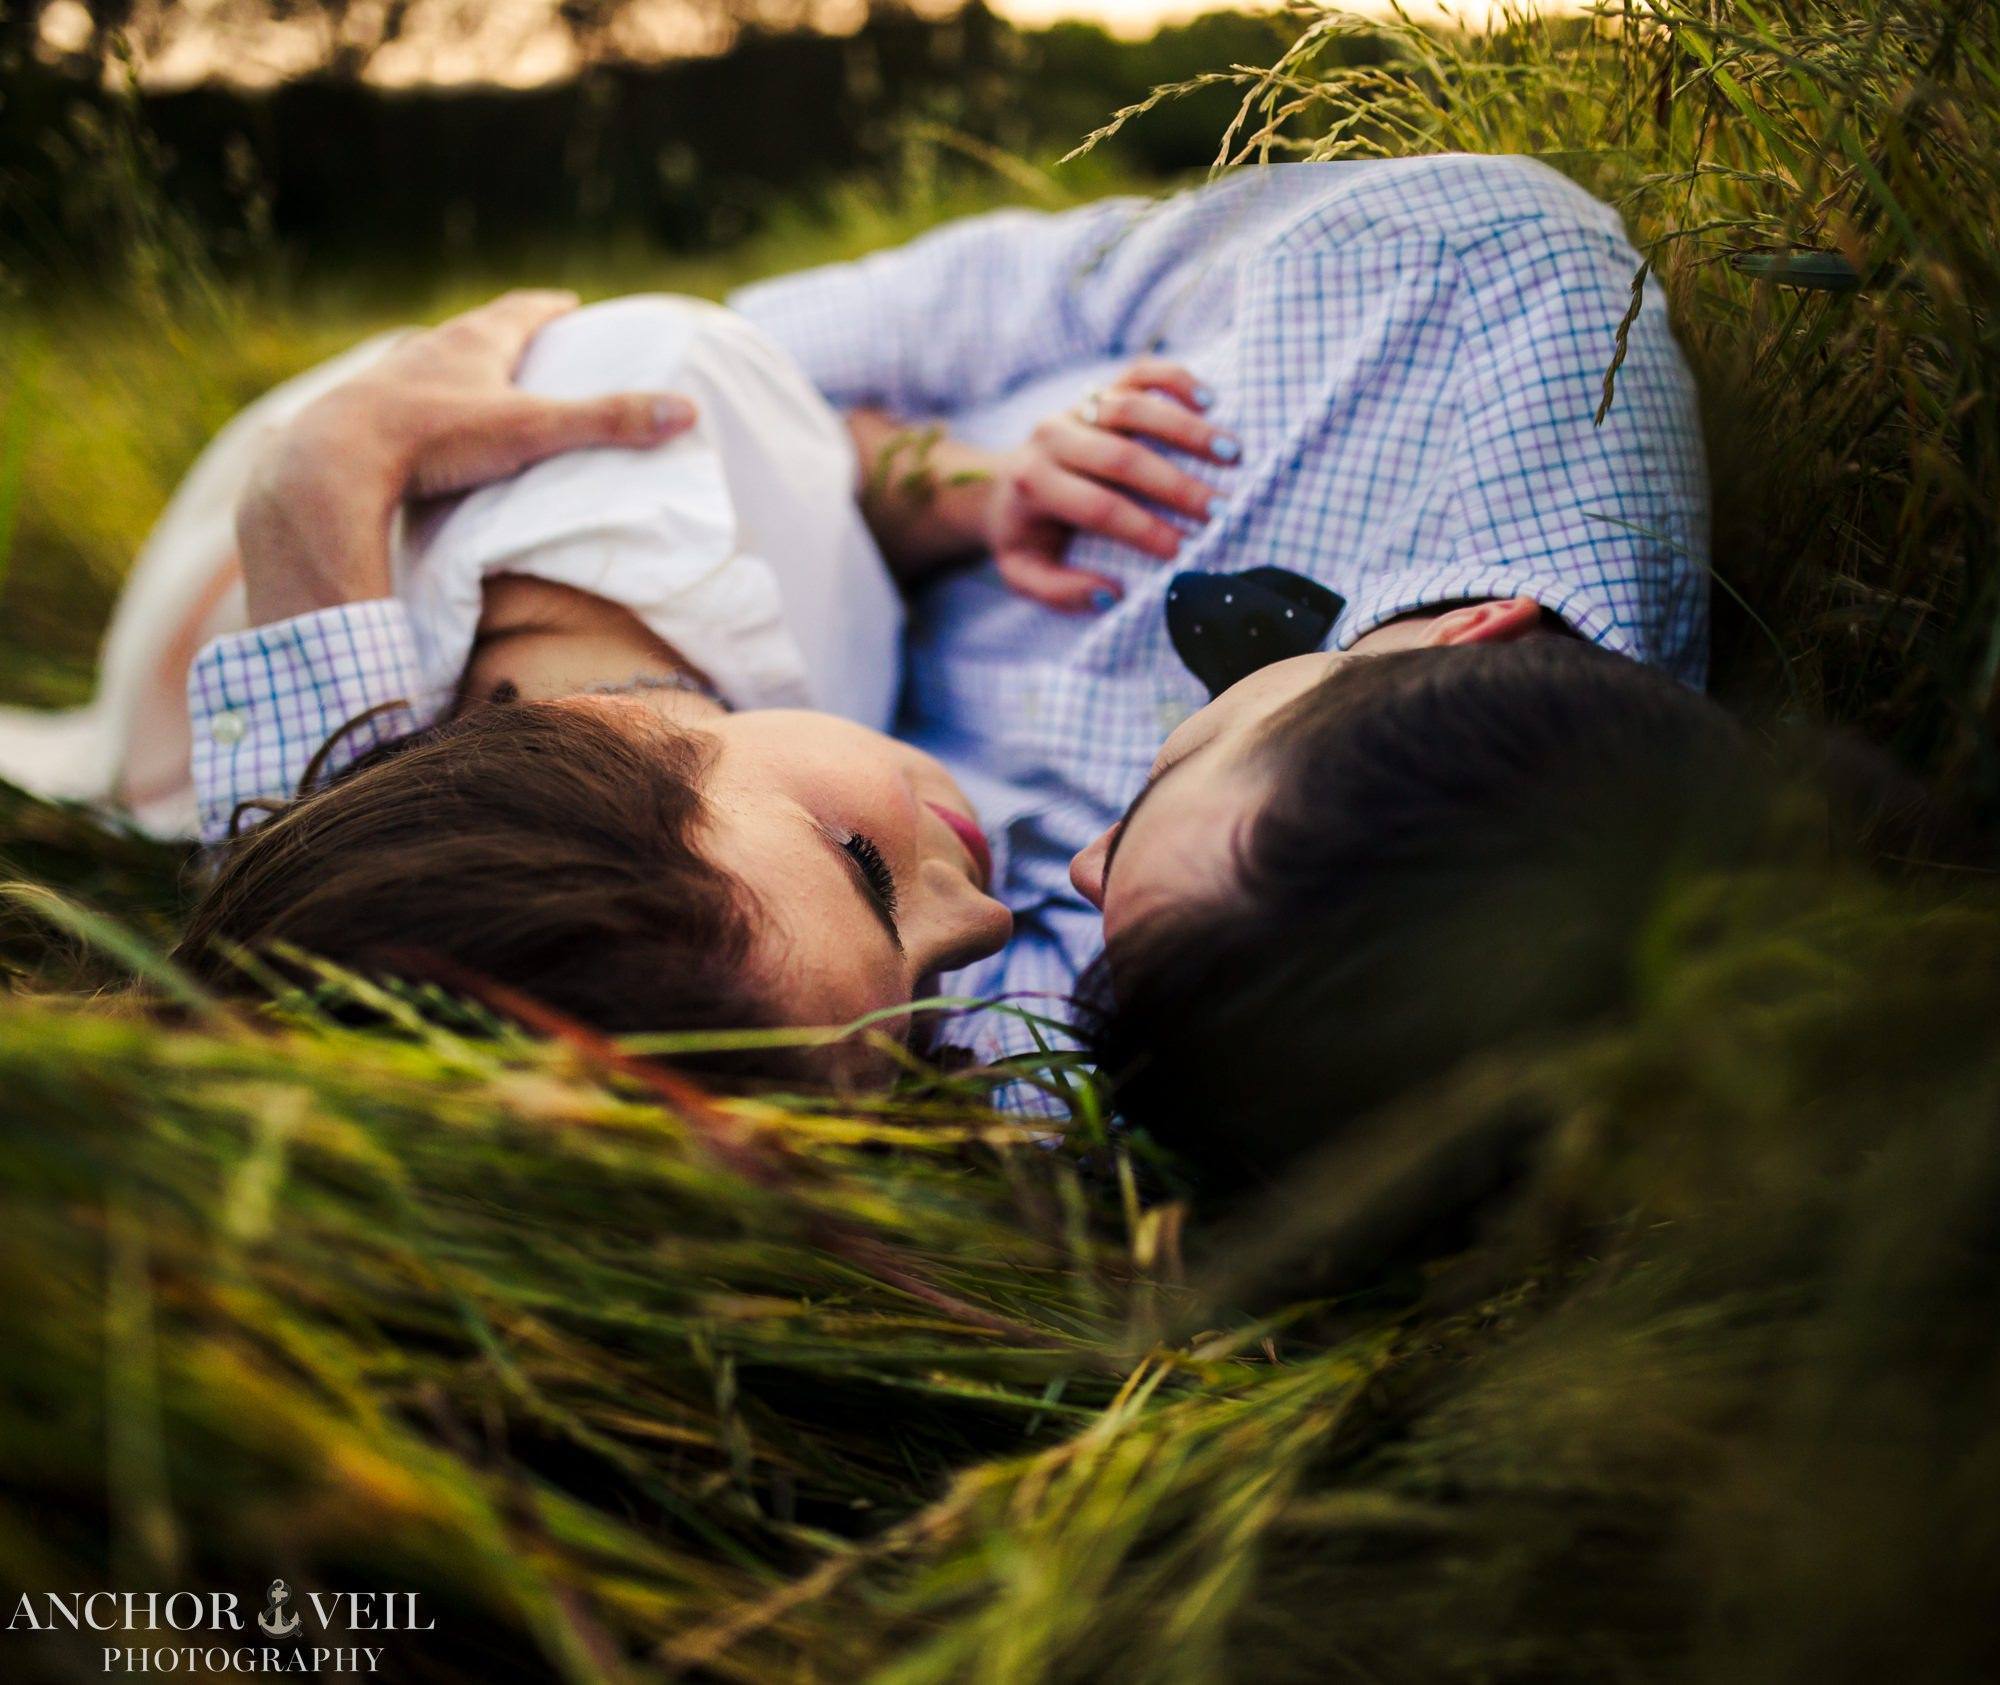 laying together in the grass